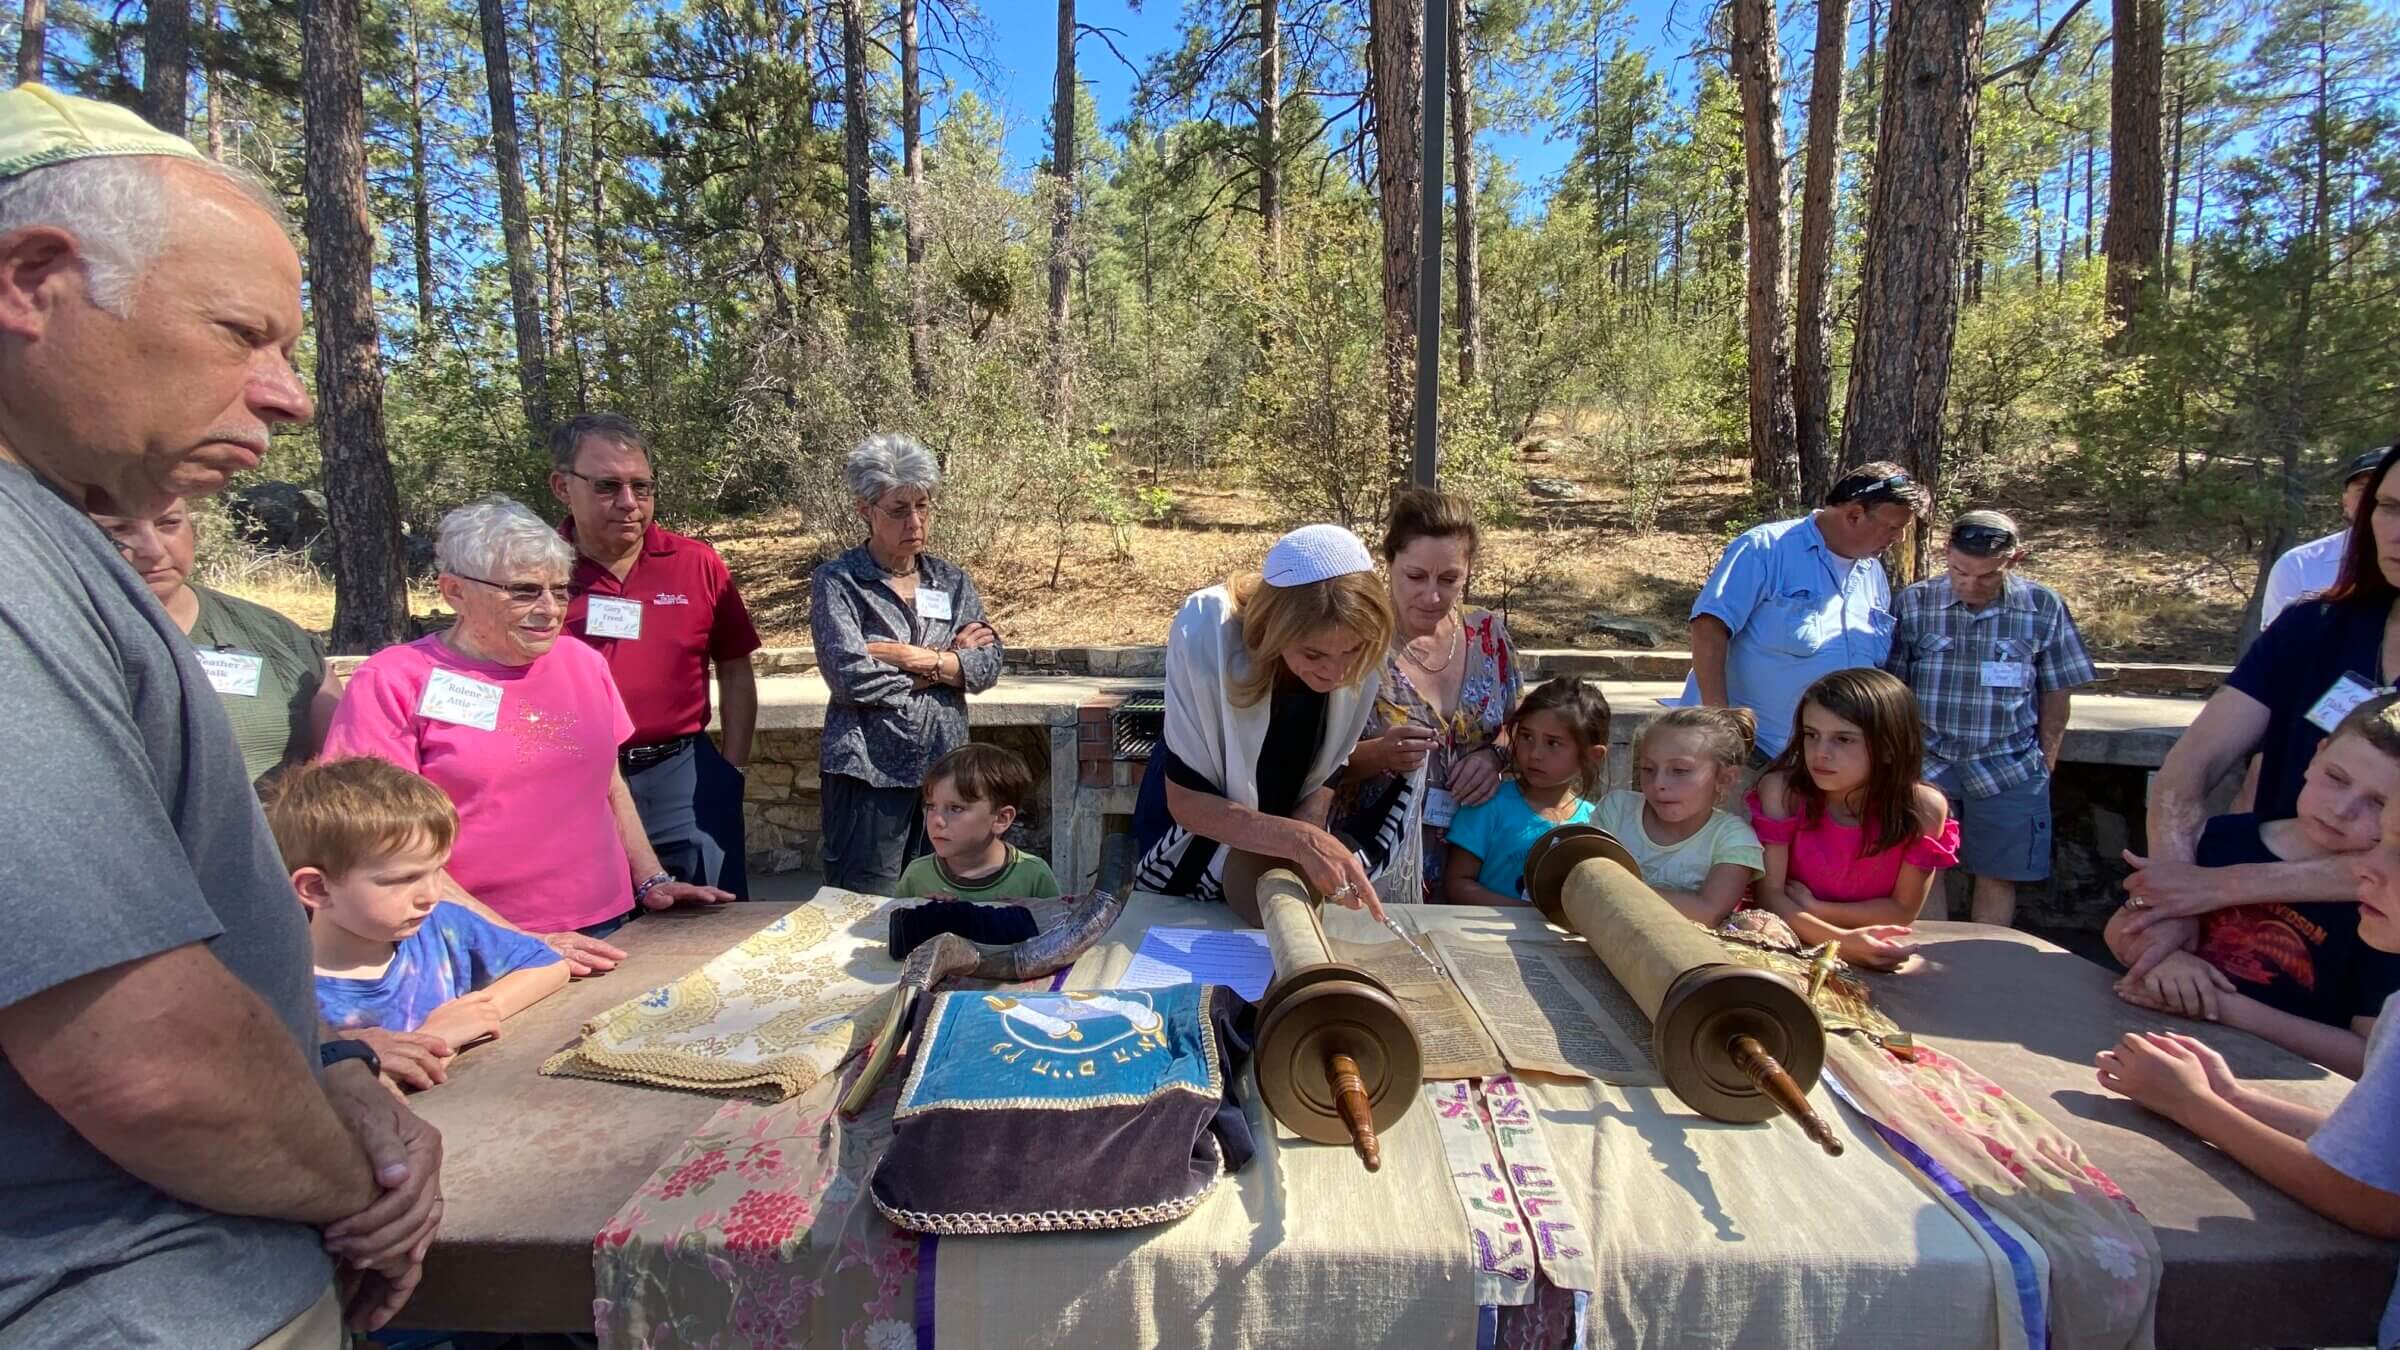 The Community celebrates Shavuot in the Prescott National Forest.